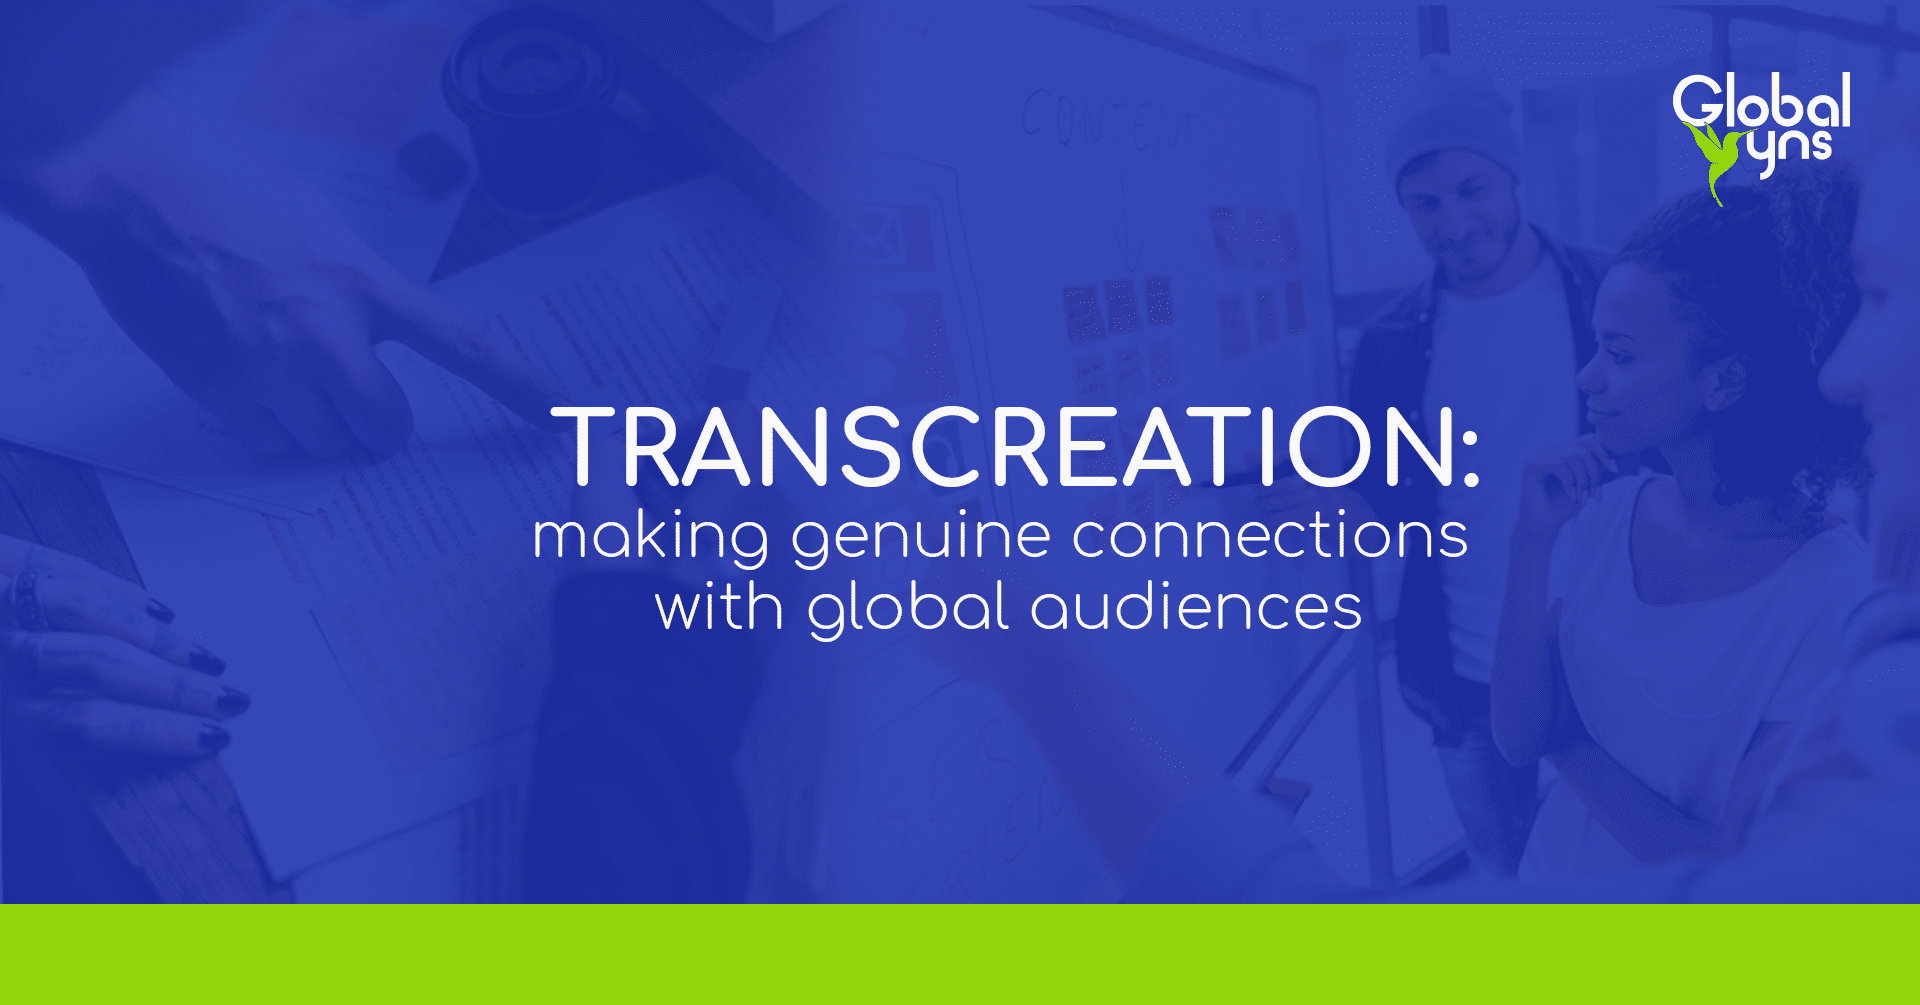 Transcreation: making genuine connections with global audiences